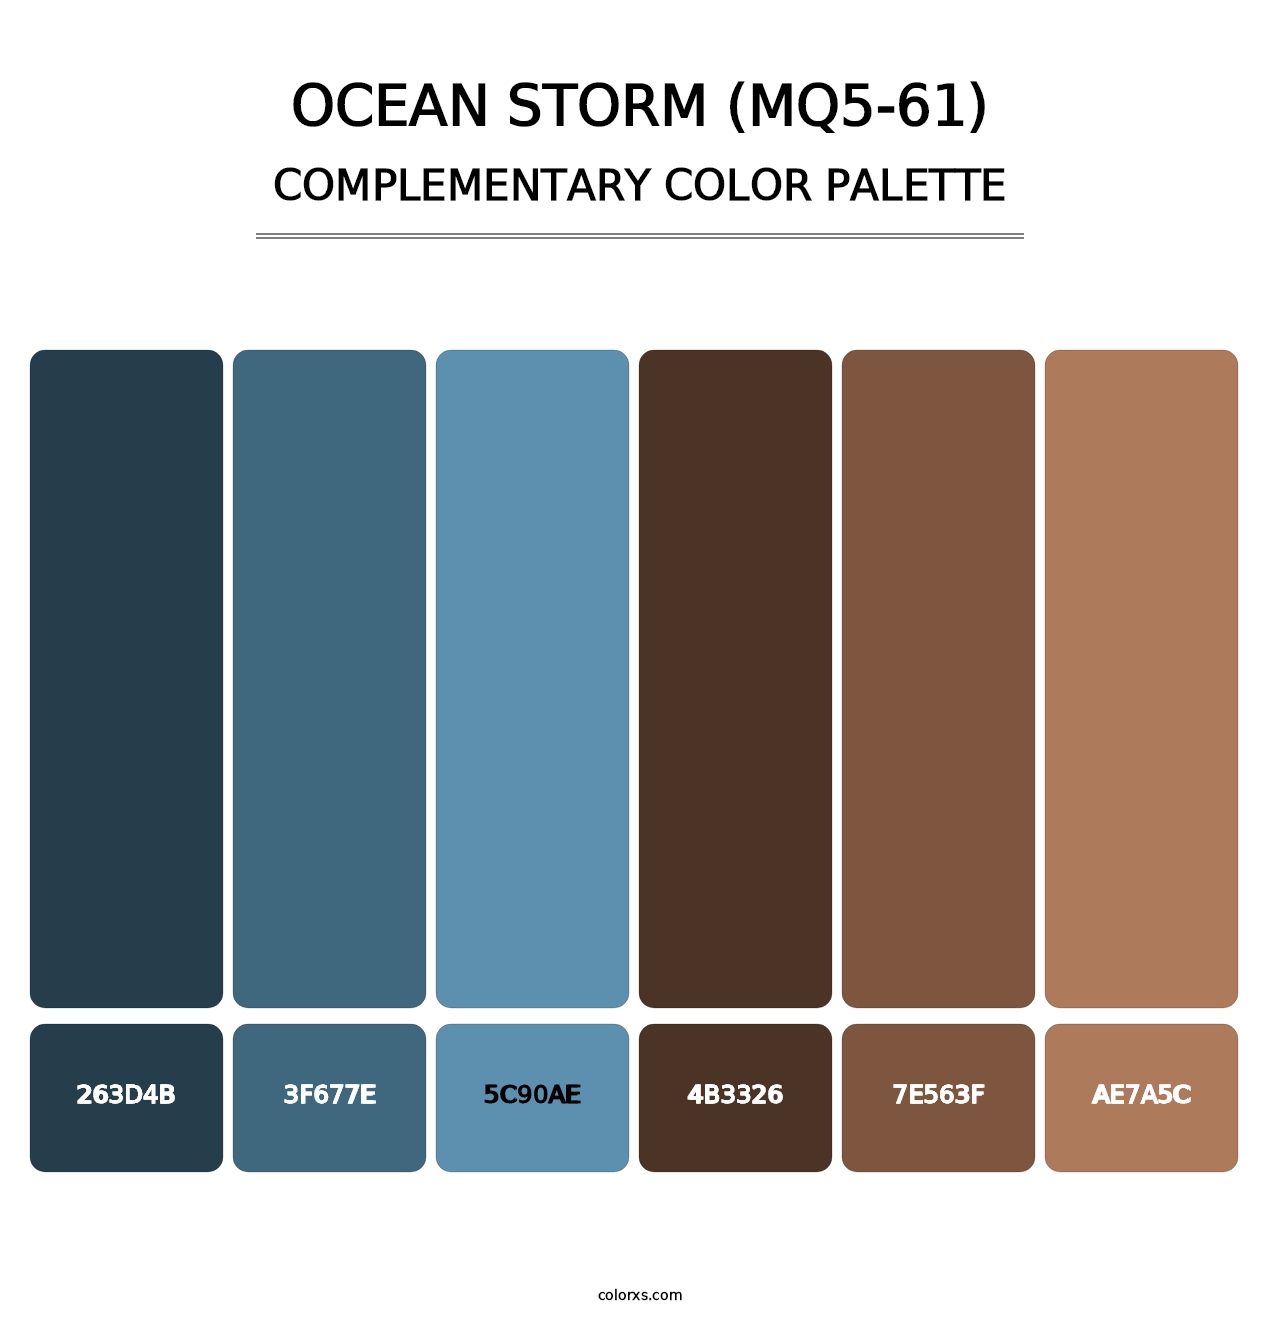 Ocean Storm (MQ5-61) - Complementary Color Palette